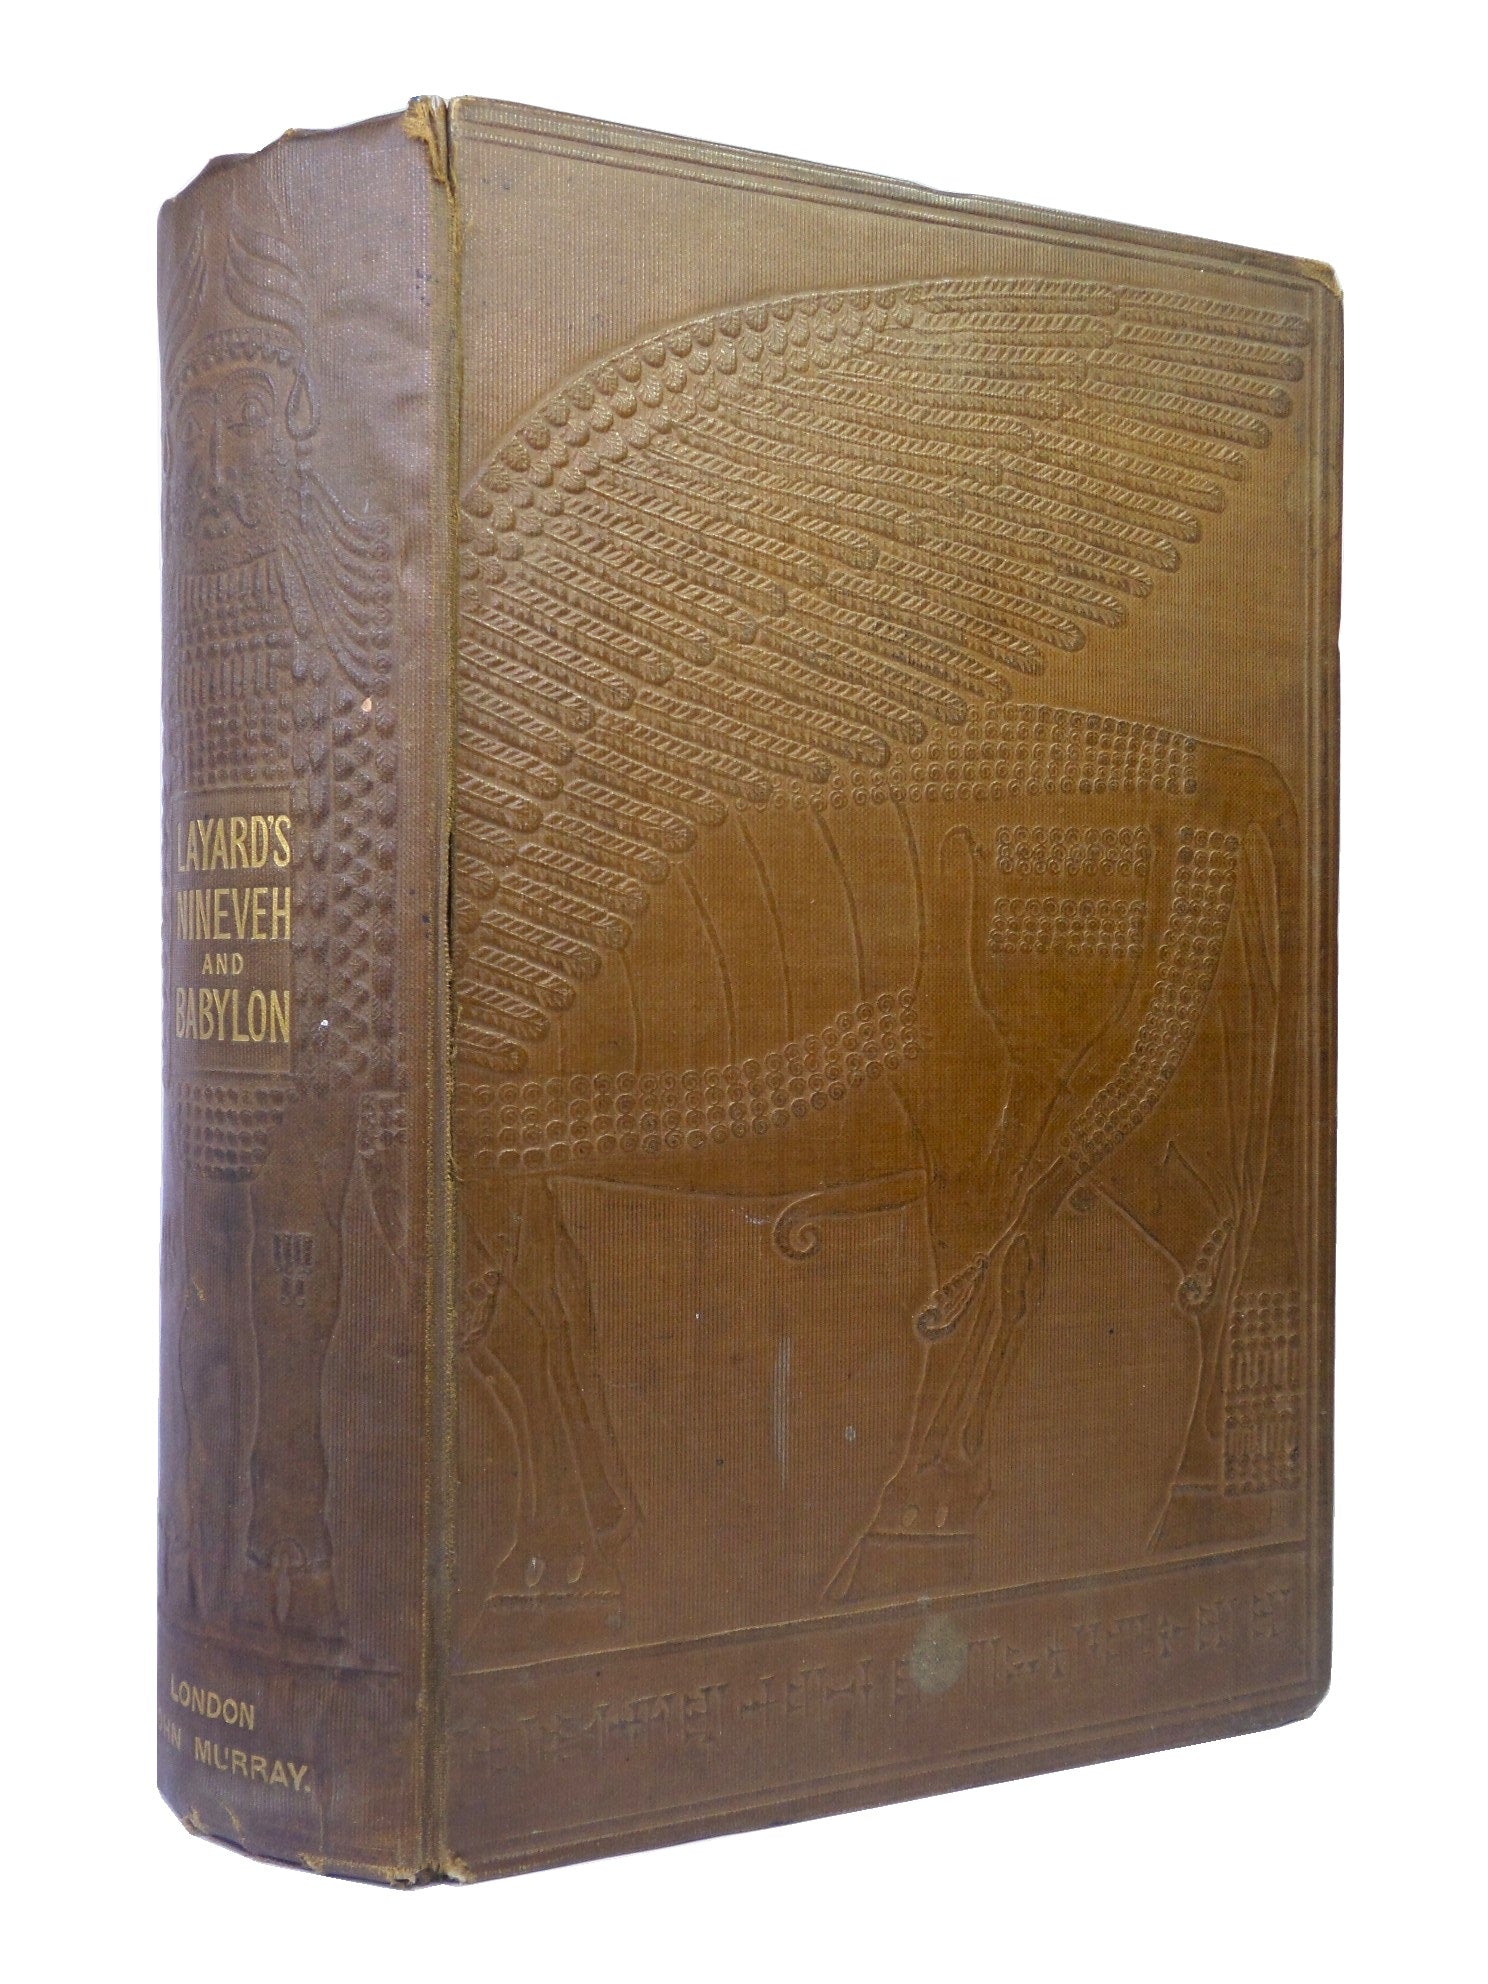 DISCOVERIES IN THE RUINS OF NINEVEH AND BABYLON BY AUSTEN H. LAYARD 1853 FIRST EDITION